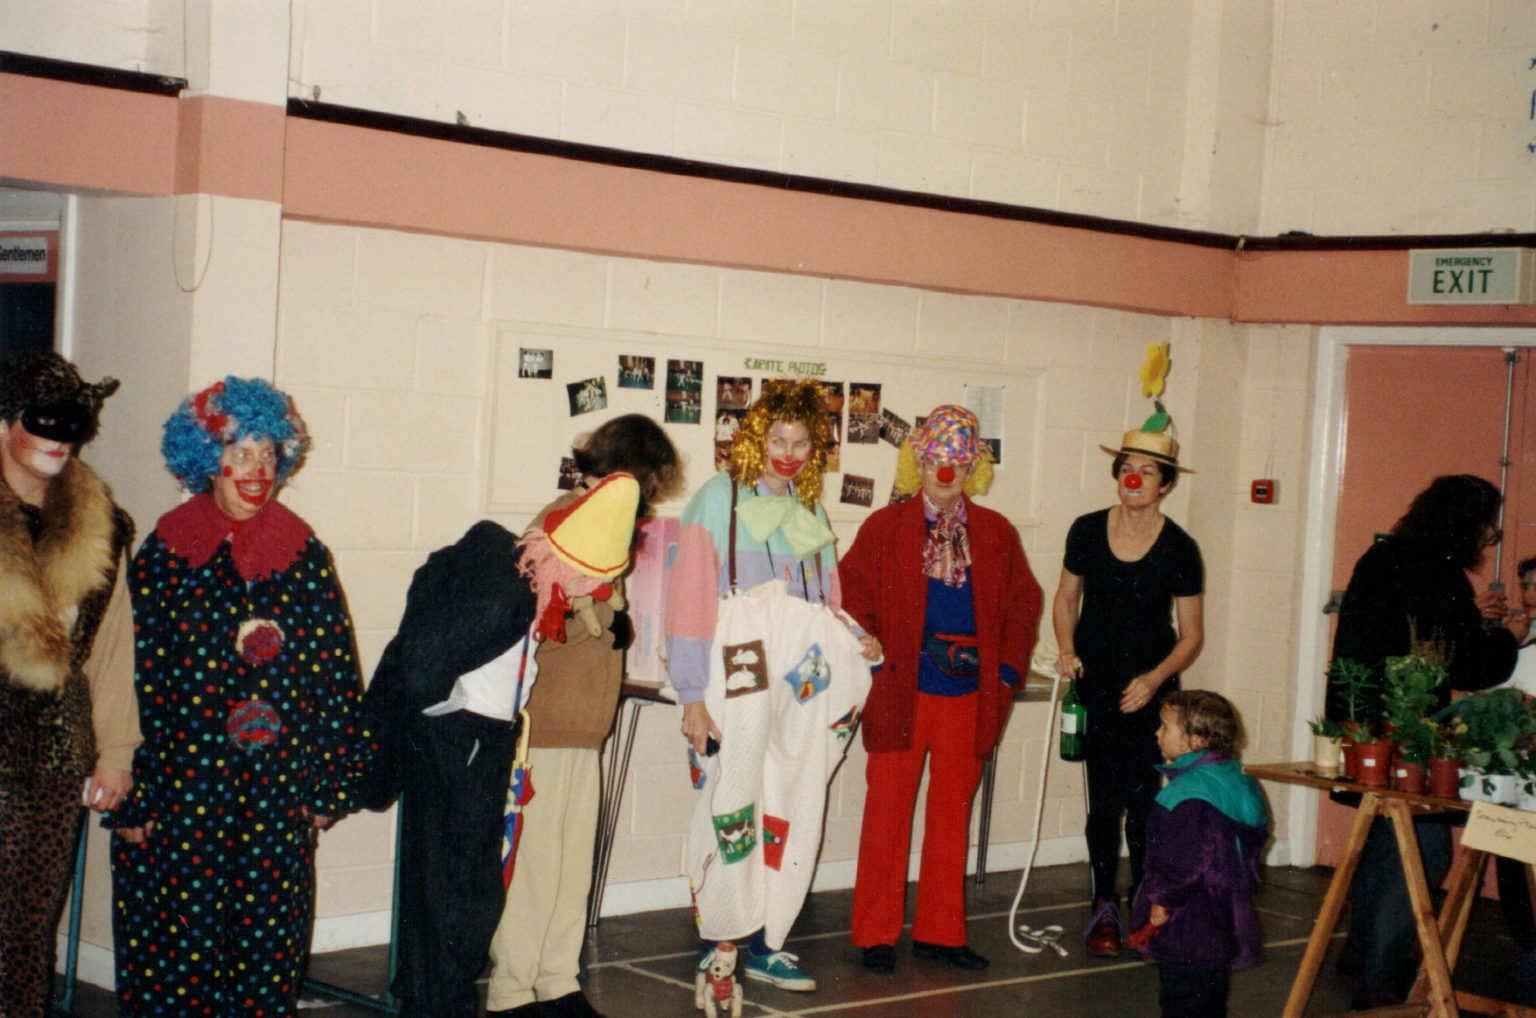 colour photo of a group of people dressed as clowns